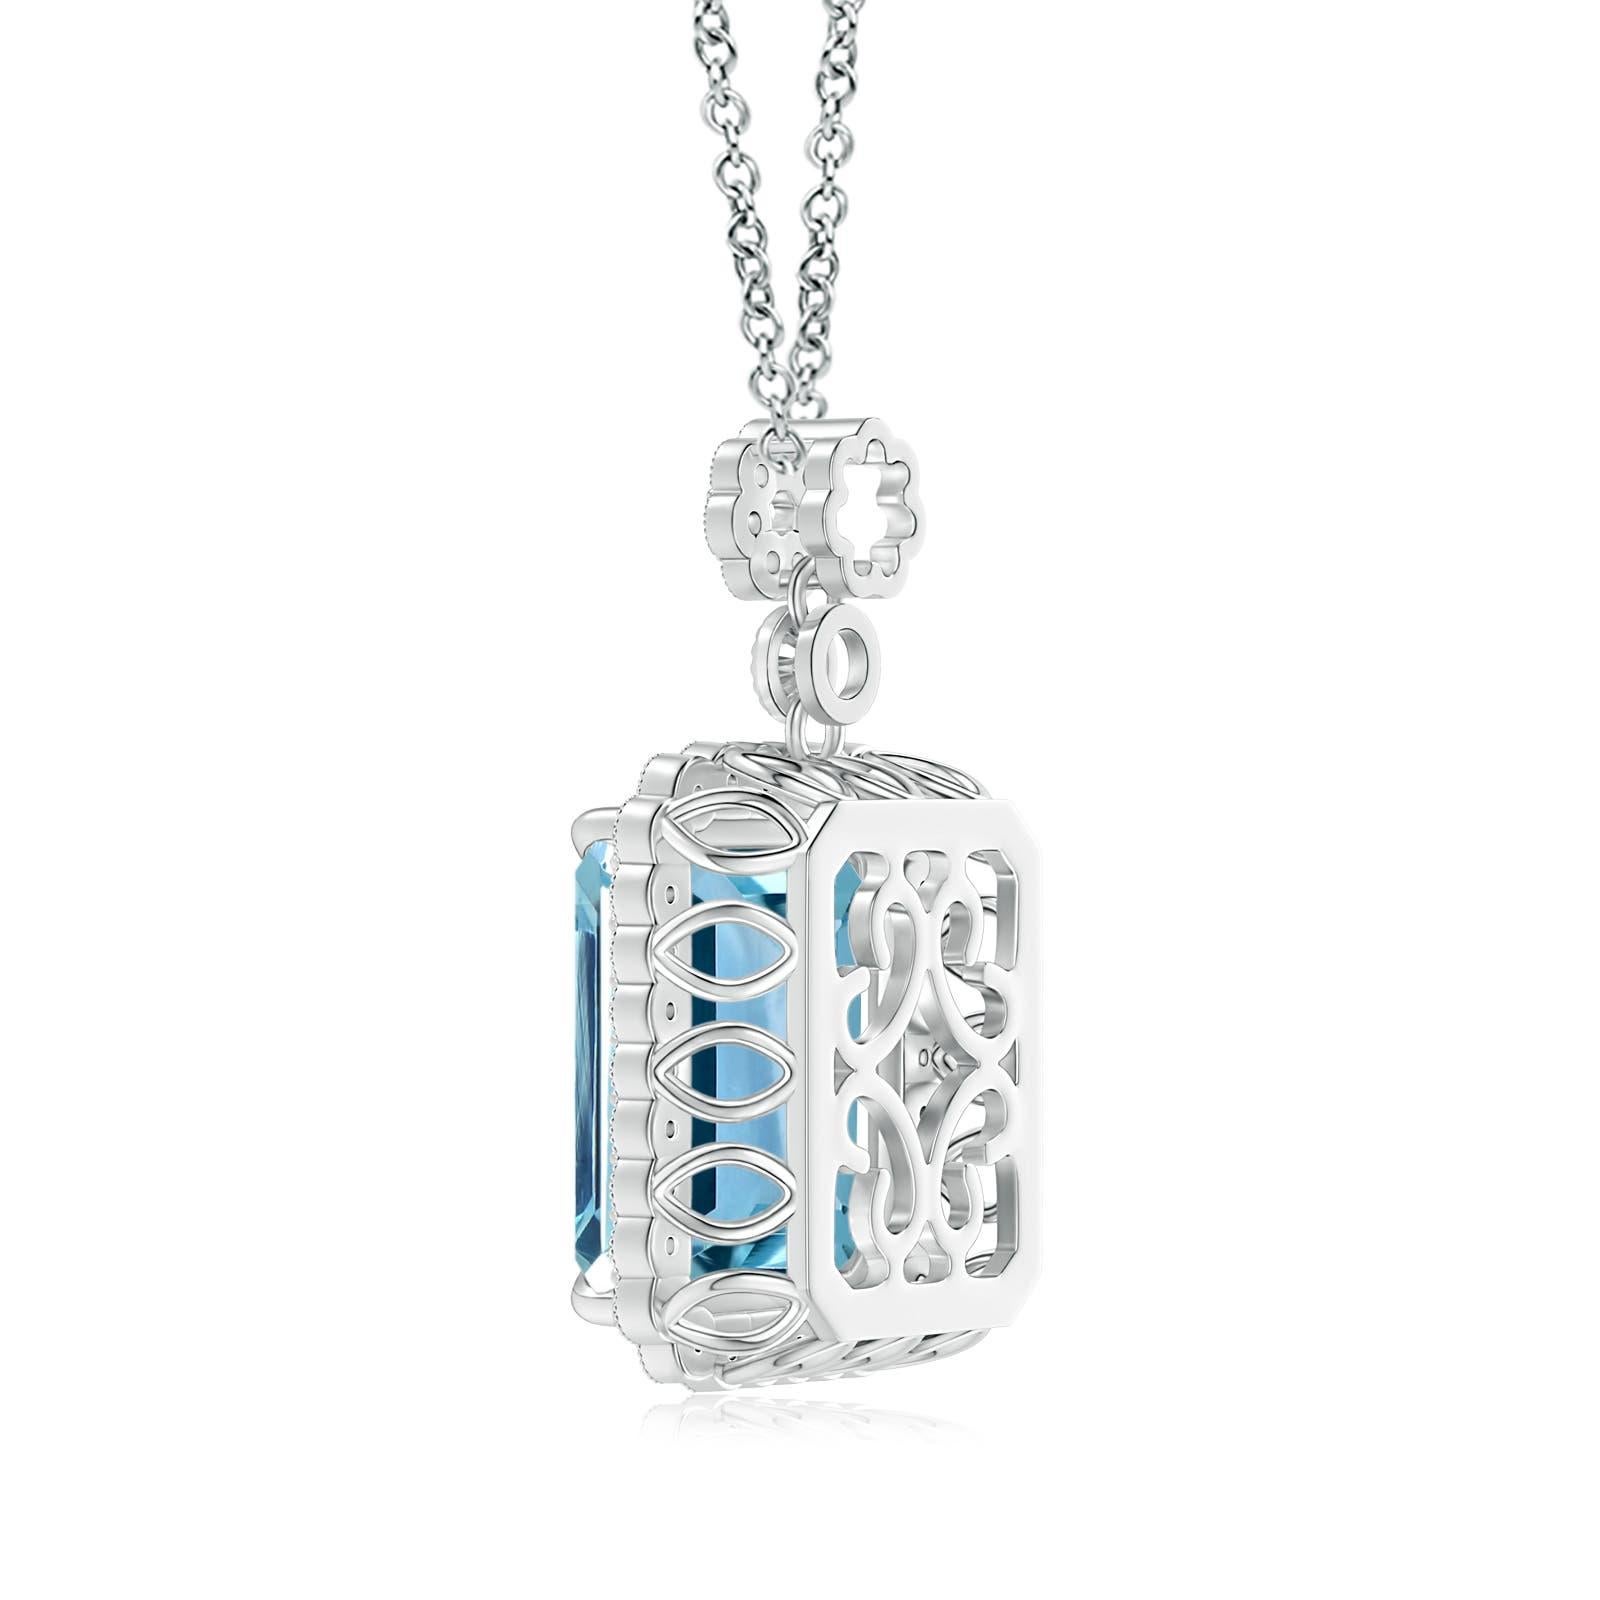 GIA Certified Emerald cut Aquamarine Pendant with Floral Bale
